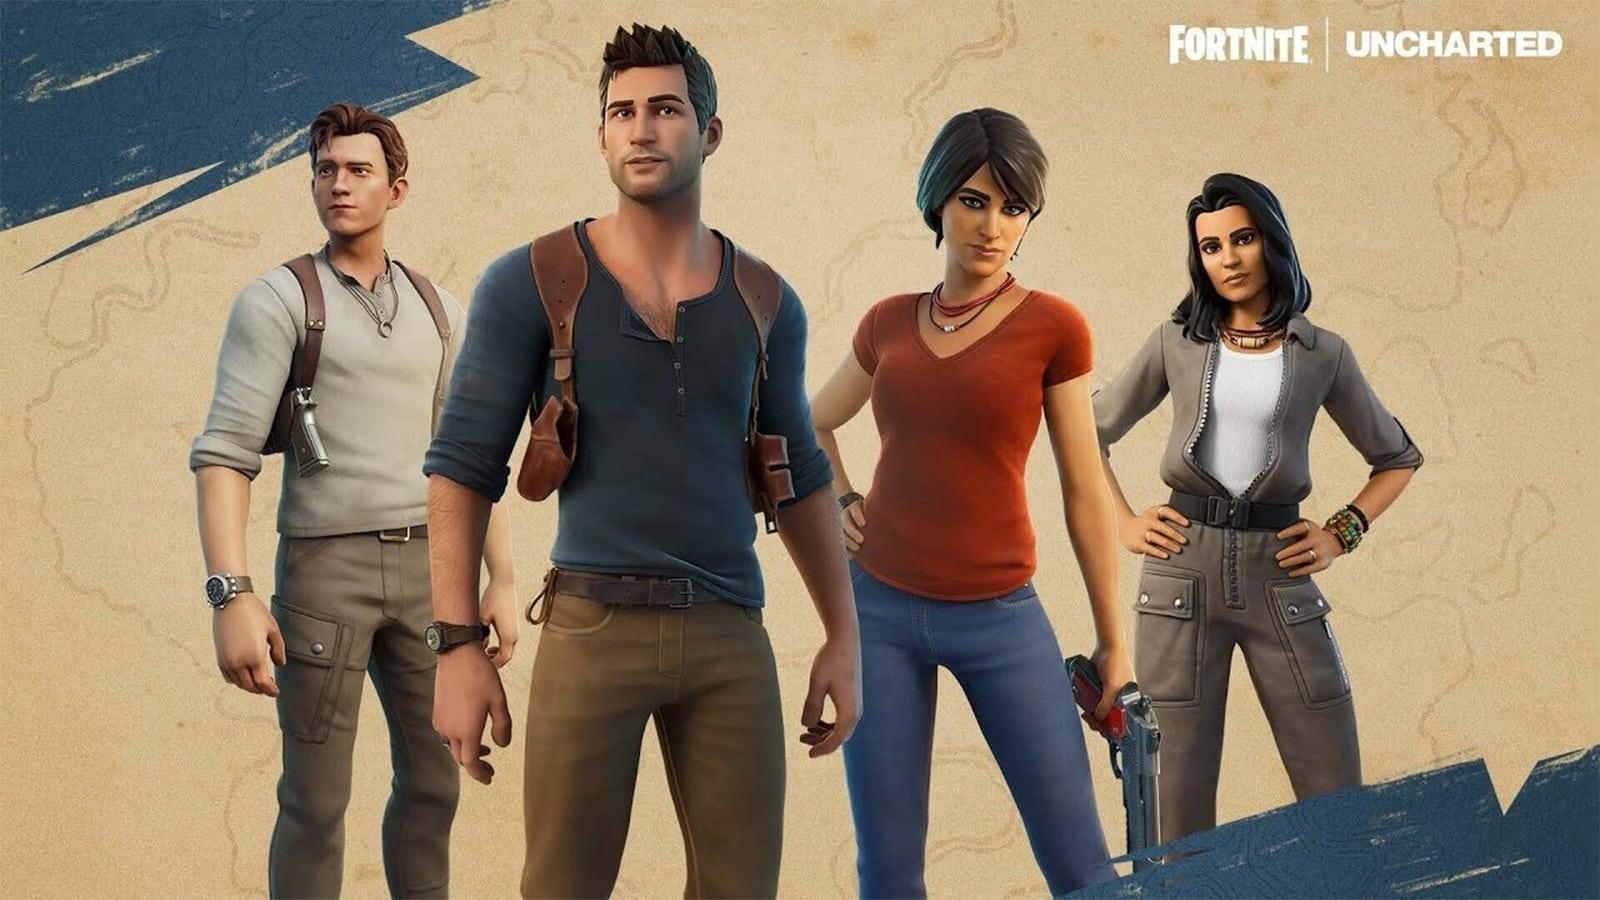 The Uncharted crossover skins in Fortnite